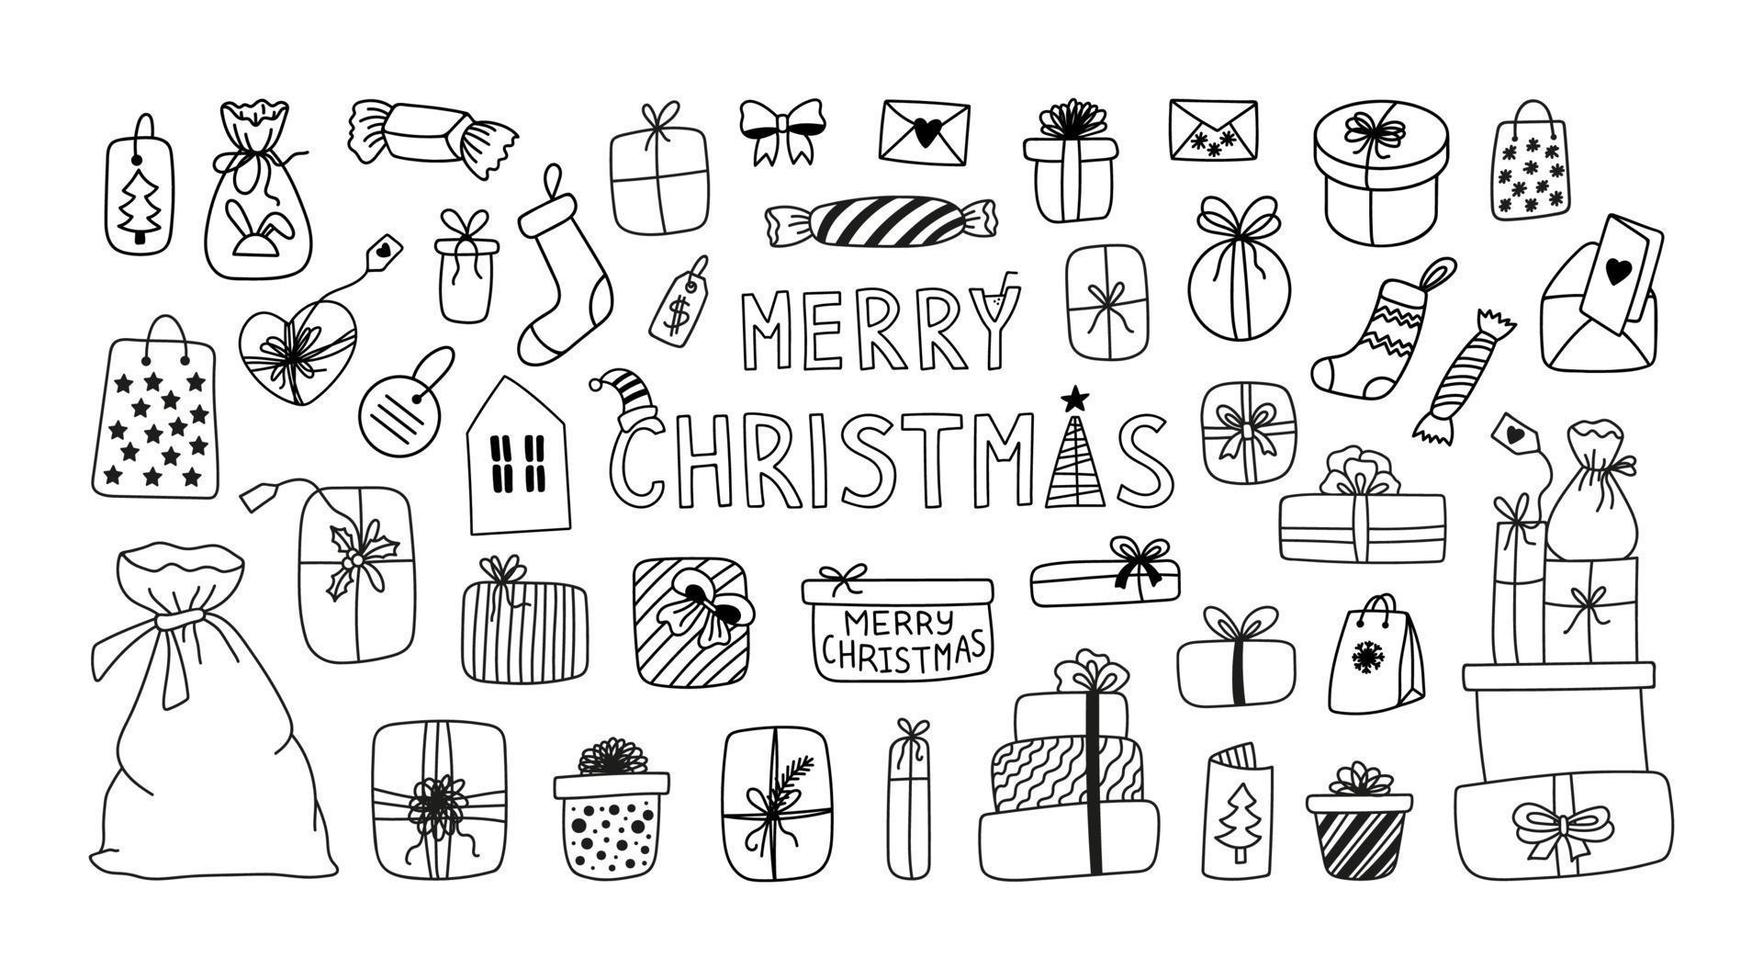 Merry Christmas set of cliparts with a gift box and packages. Hand drawn vector doodles